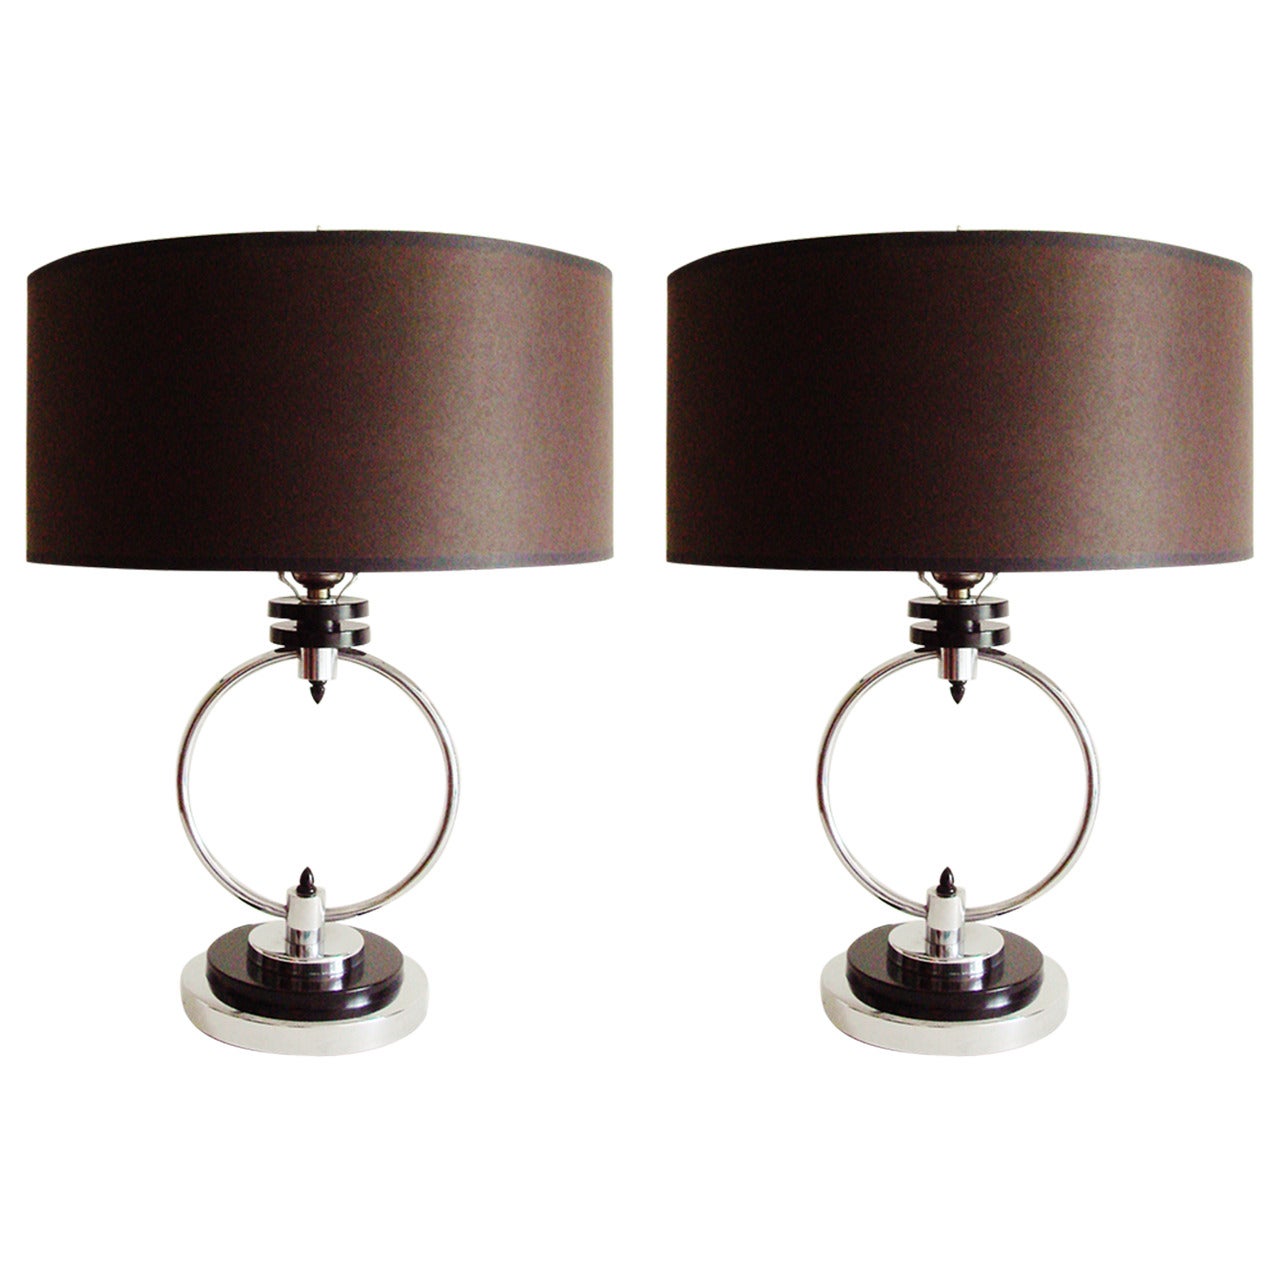 Pair of American Art Deco or Machine Age Chrome and Black Table or Bedside Lamps For Sale